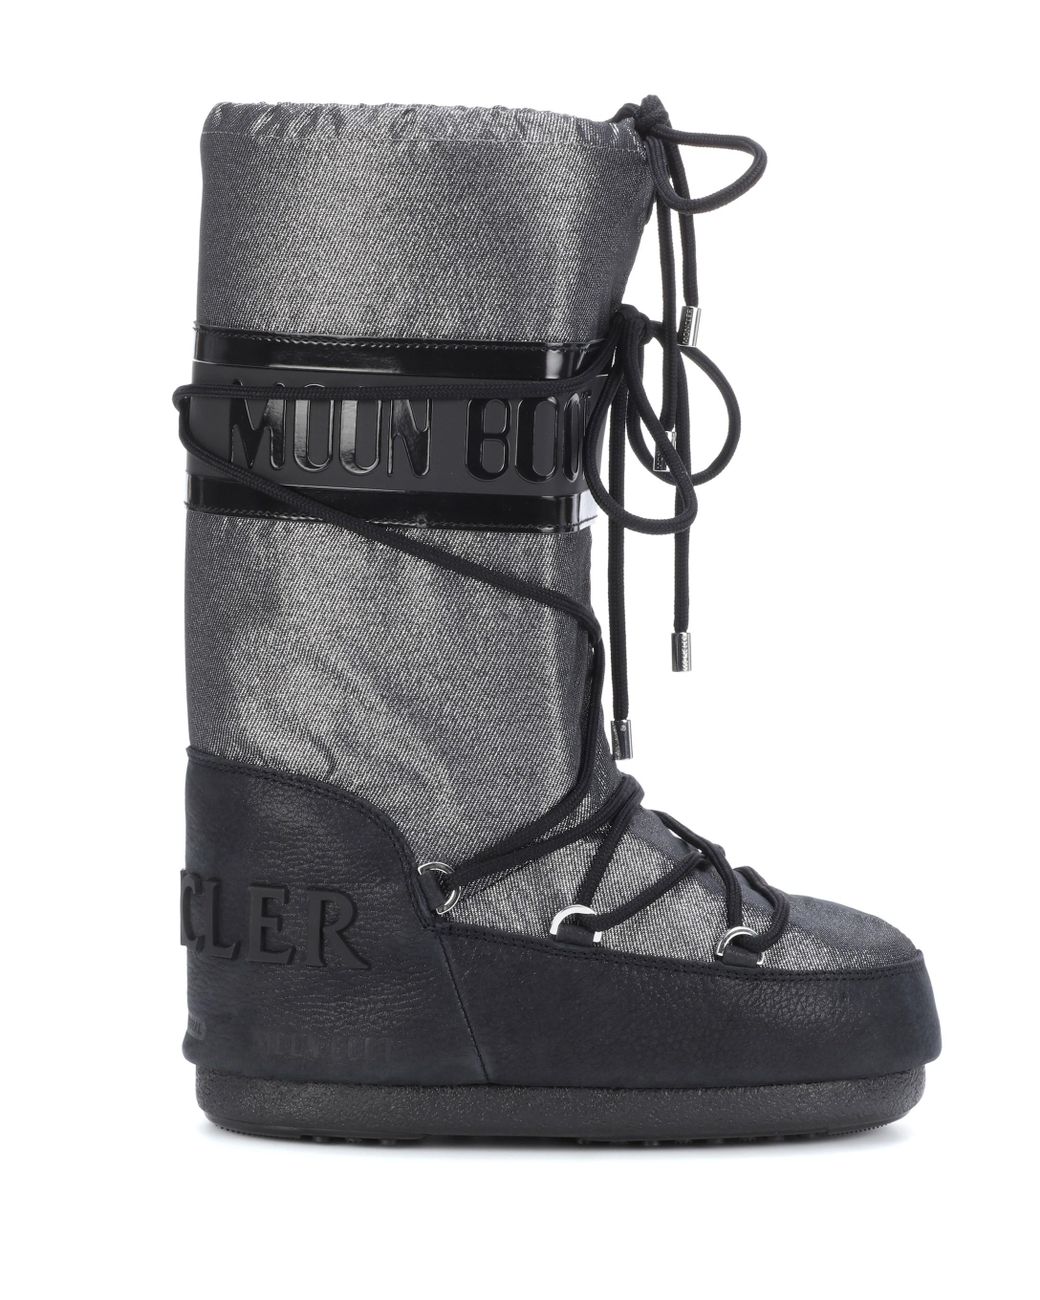 8 Moncler Palm Angels X Moon Boot Shedir Snow Boots in Multicoloured -  Moncler